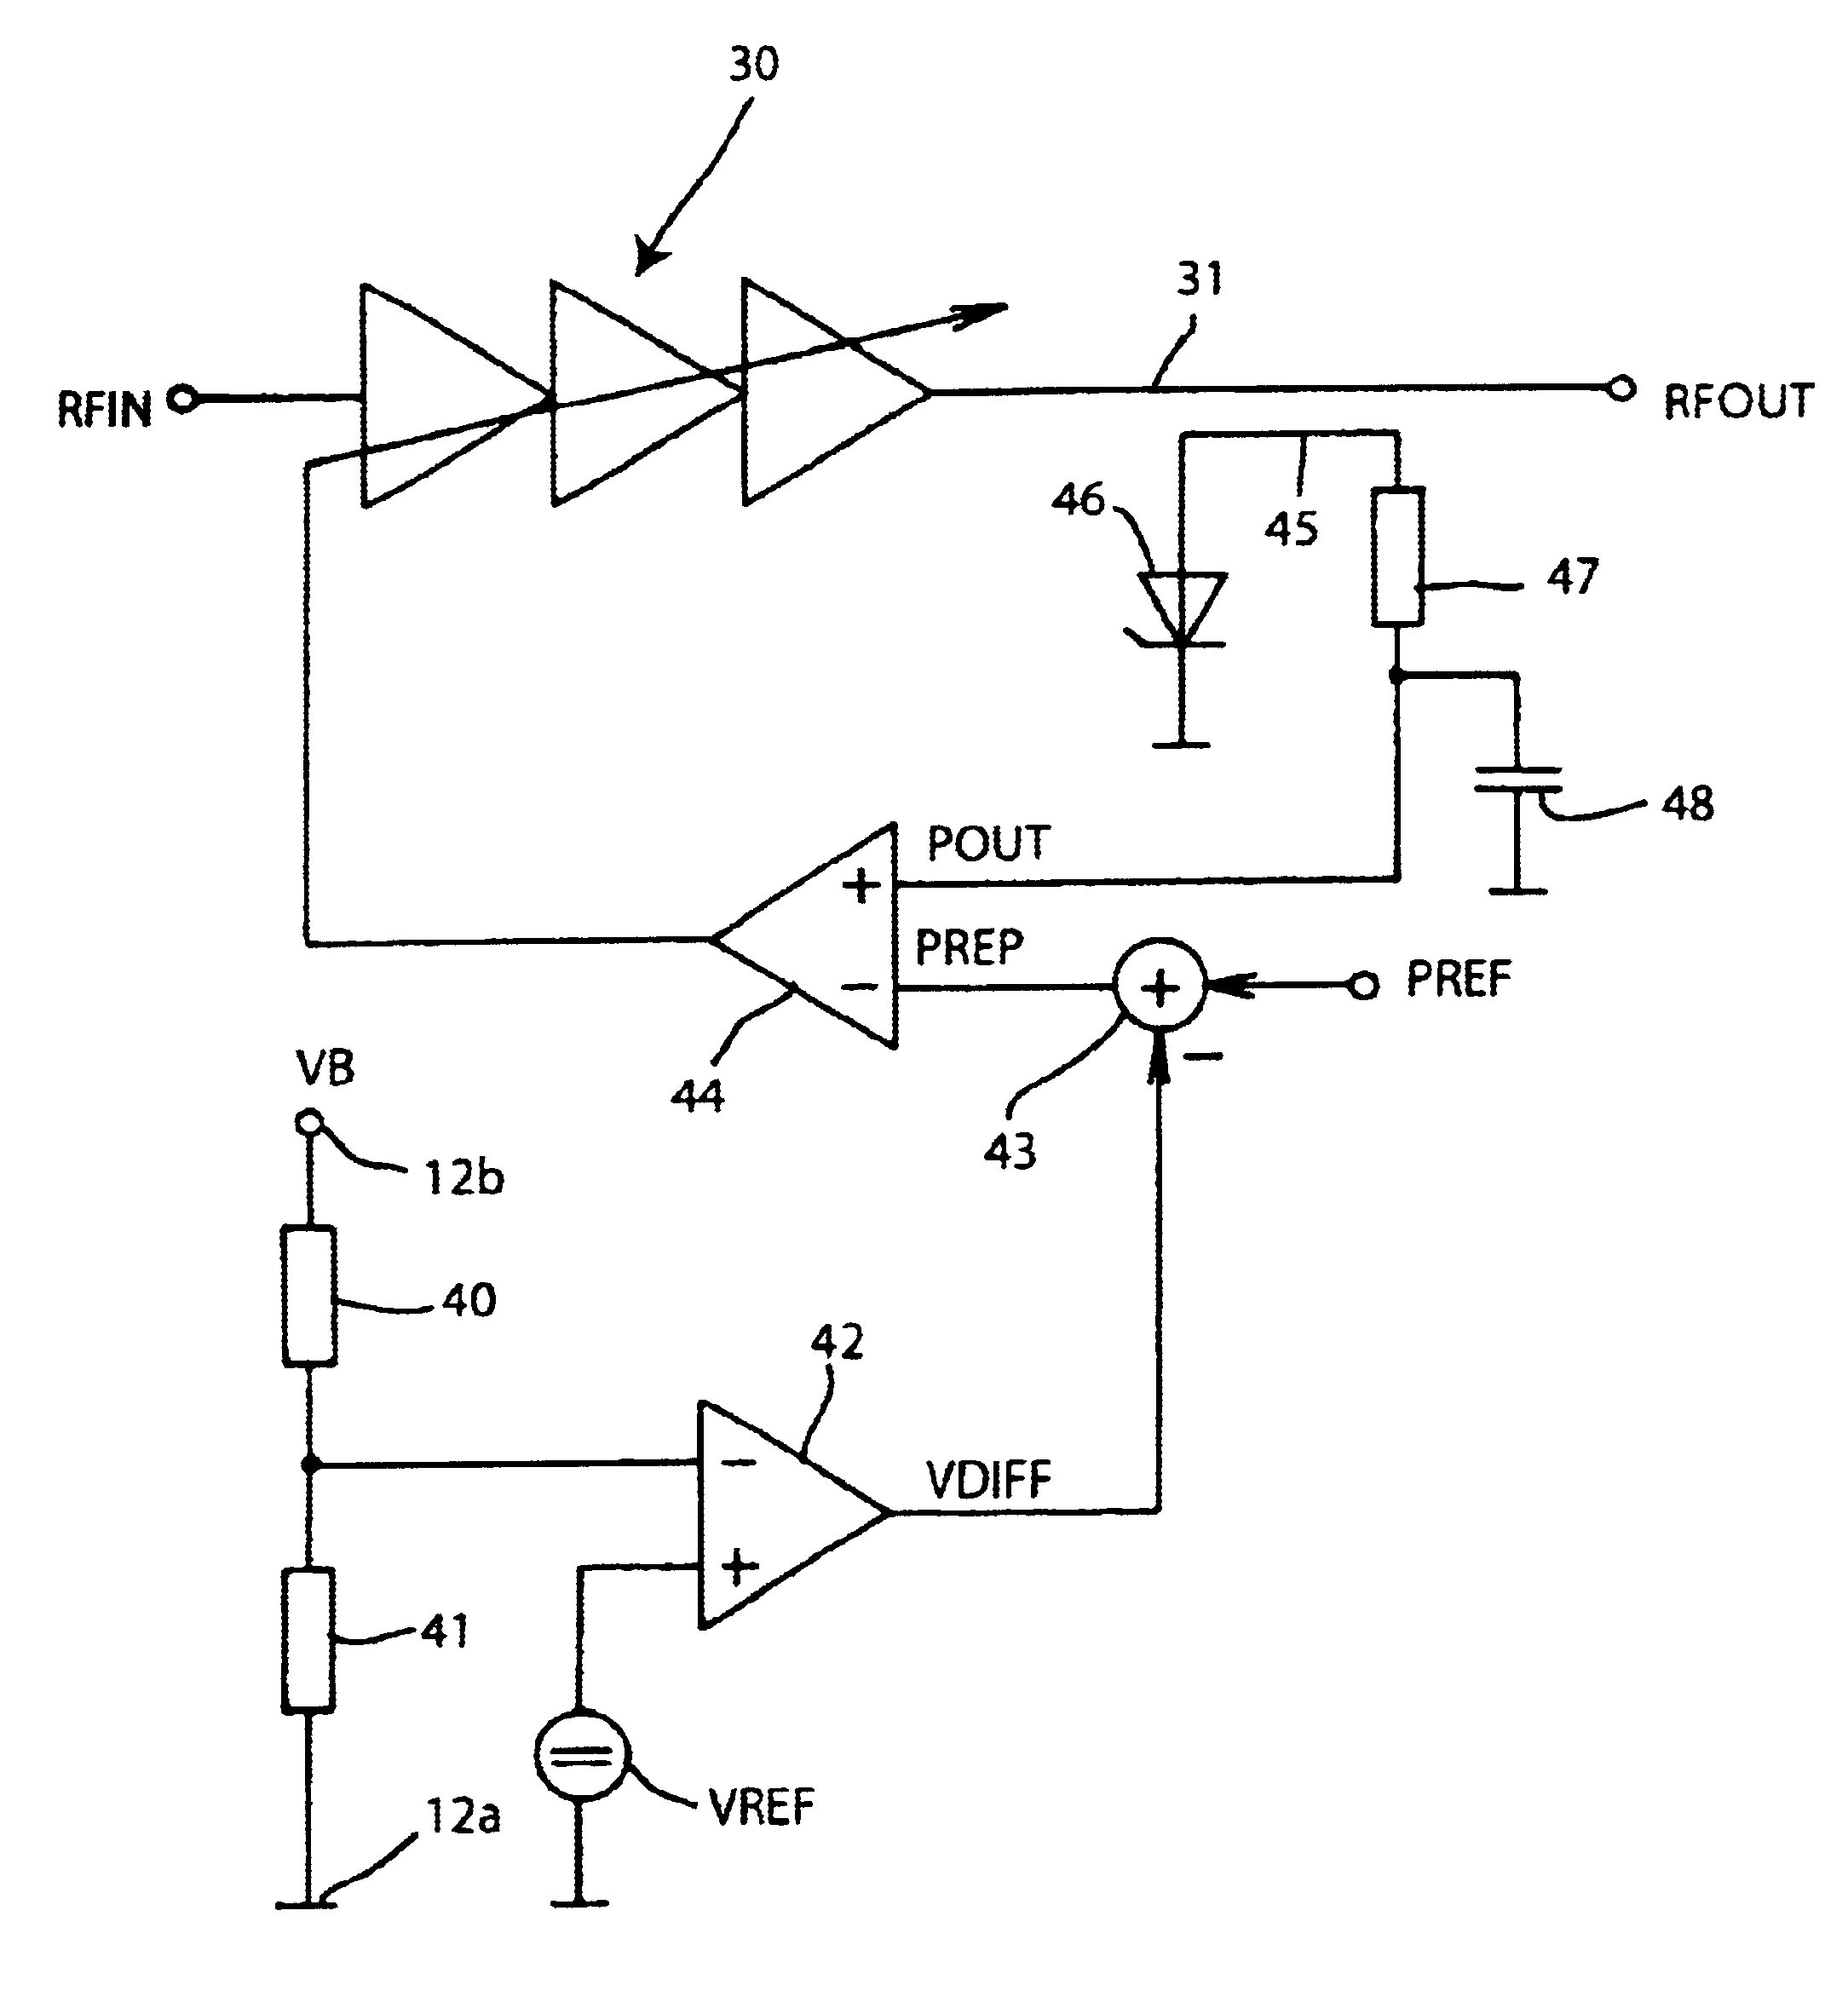 Circuit configuration for controlling the transmitting power of a battery-operated transceiver